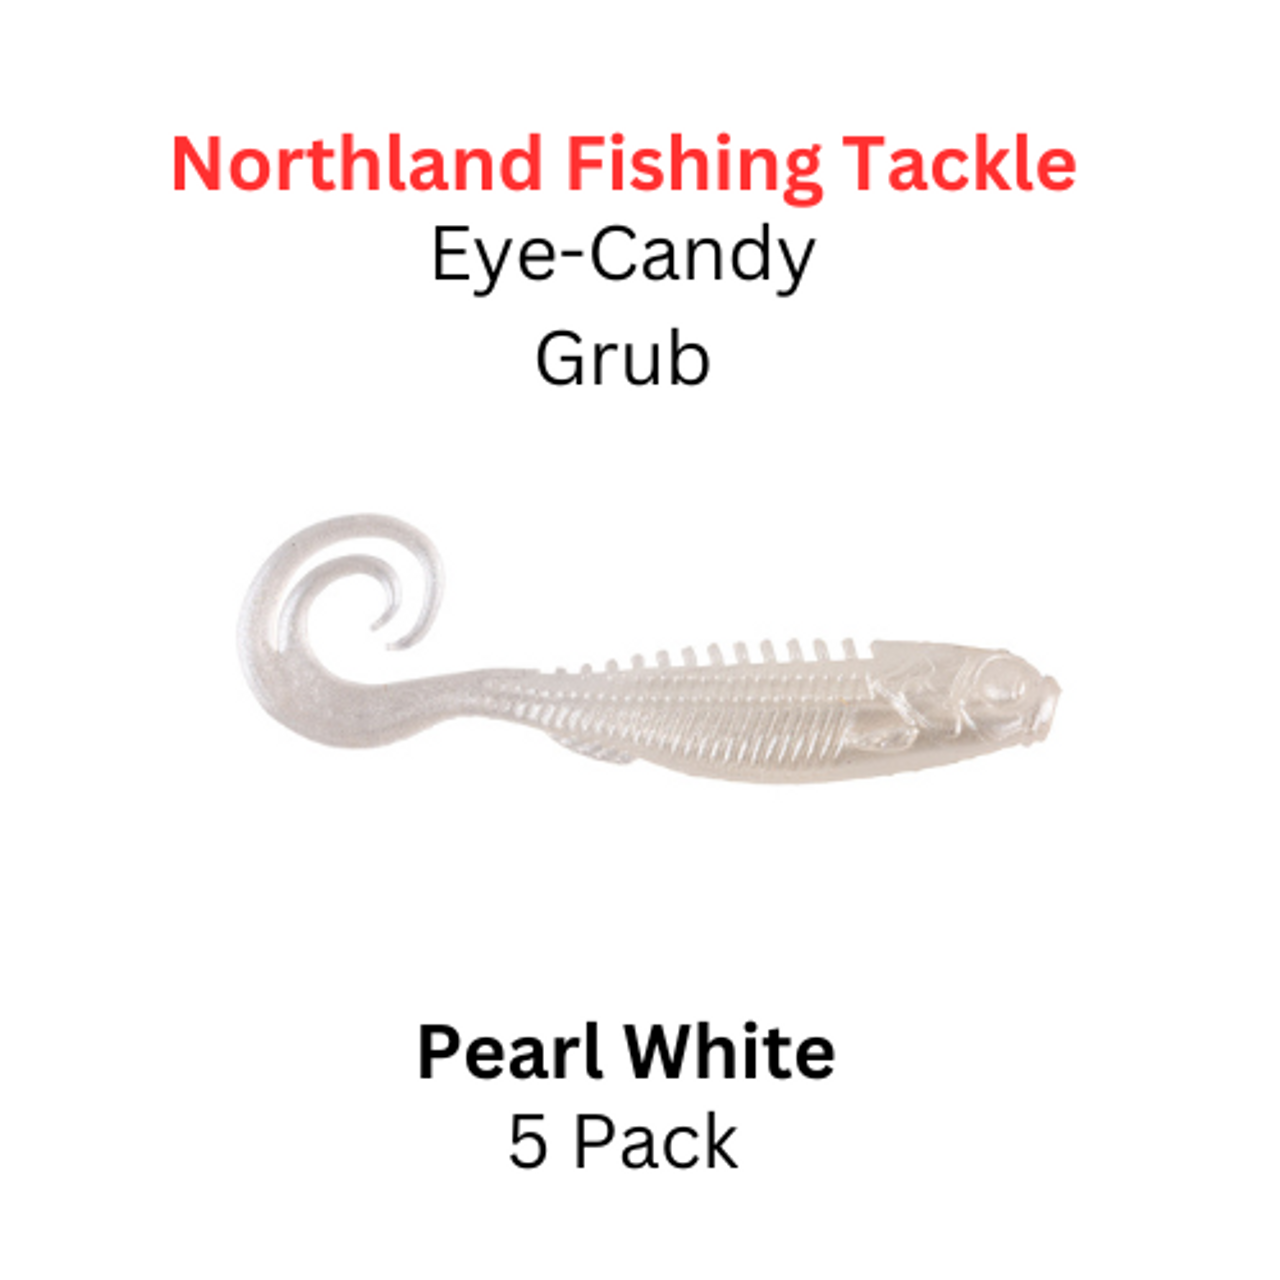 https://cdn11.bigcommerce.com/s-u9nbd/images/stencil/1280x1280/products/6651/16837/Northland_Fishing_Tackle_Eye_Candy_Grub_Pearl_White___40680.1688755442.png?c=2